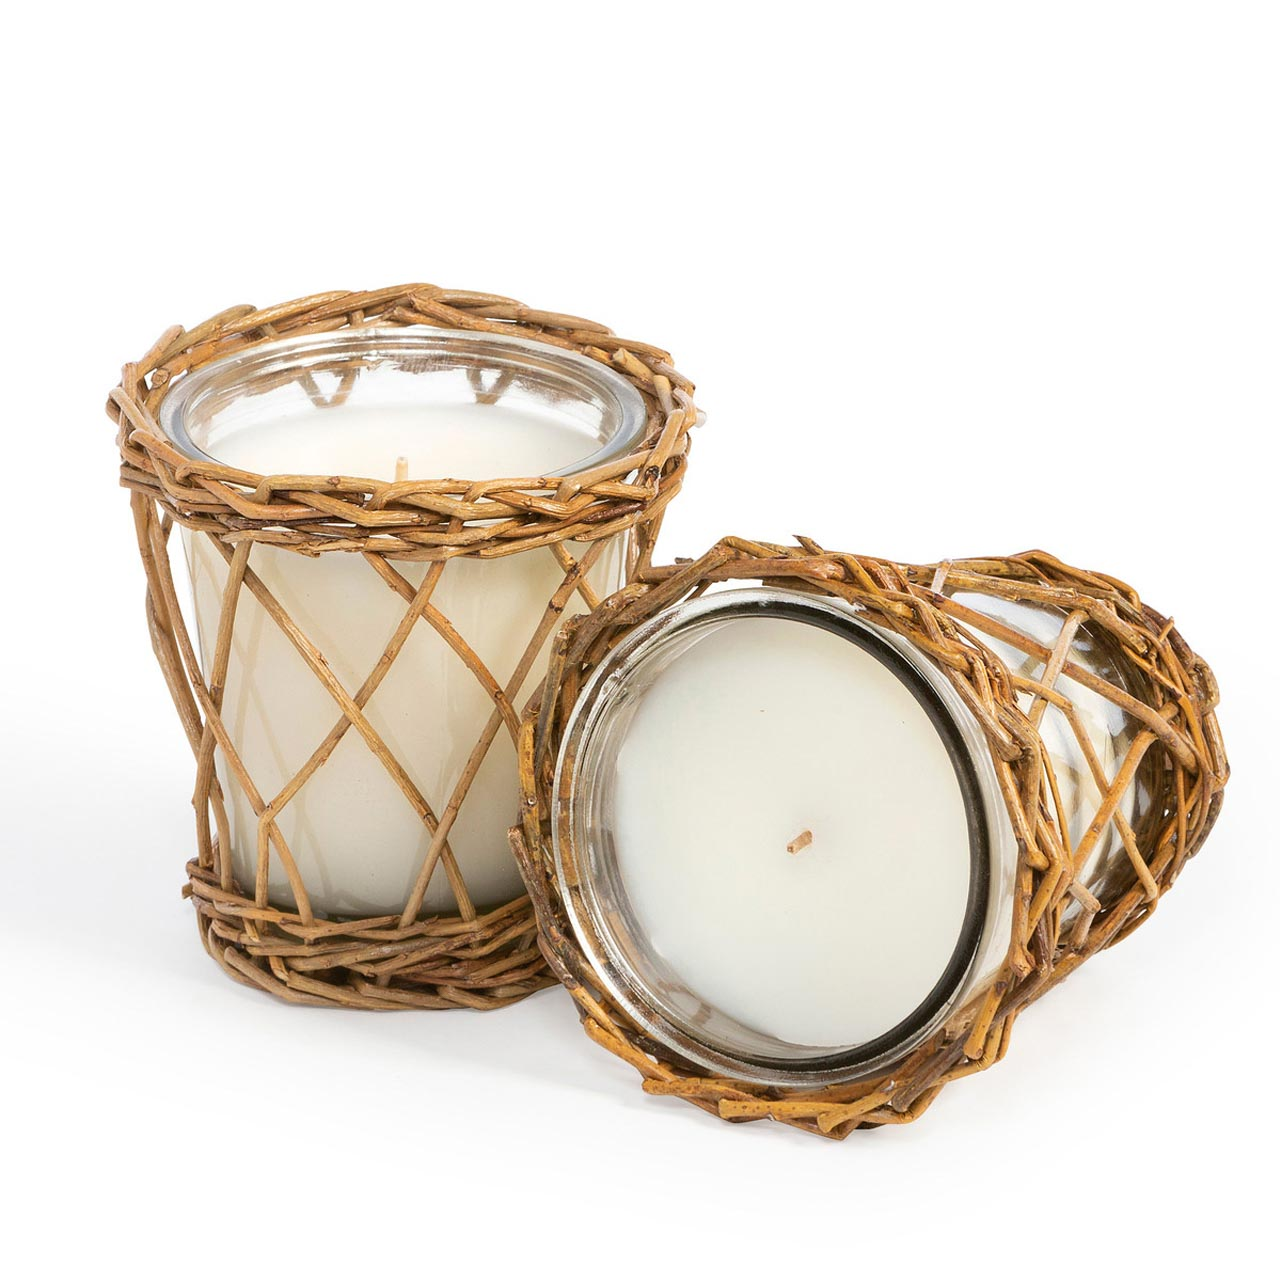 Park Hill Collection Candle - Willow